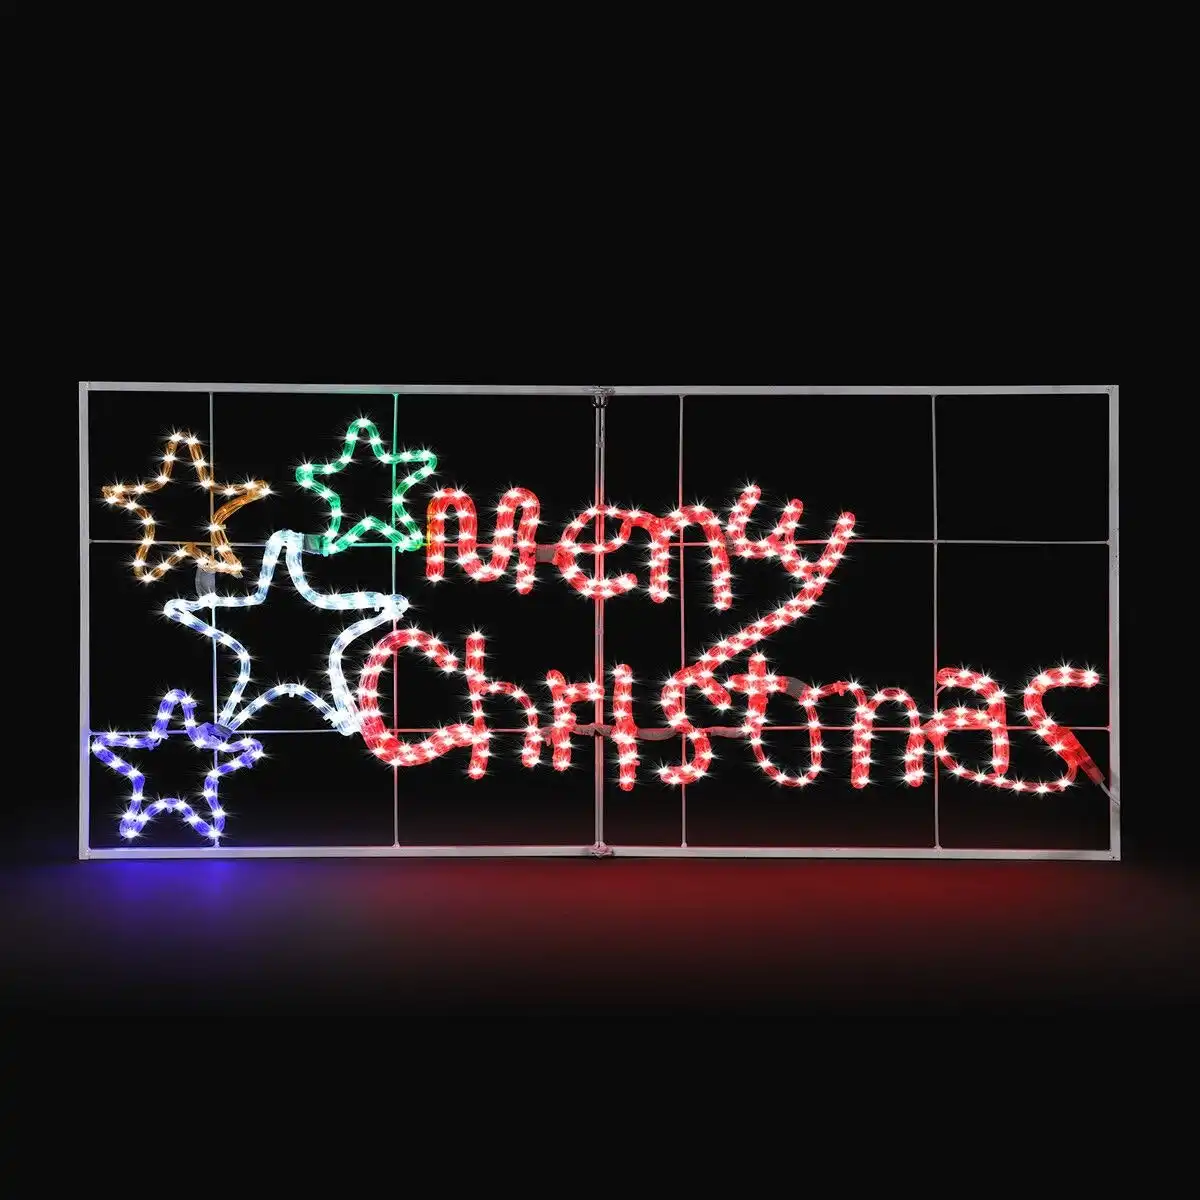 Solight  Merry Christmas Light Xmas LED Rope Strip Decoration Holiday Ornament Indoor Outdoor IP65 130x60cm XL Size